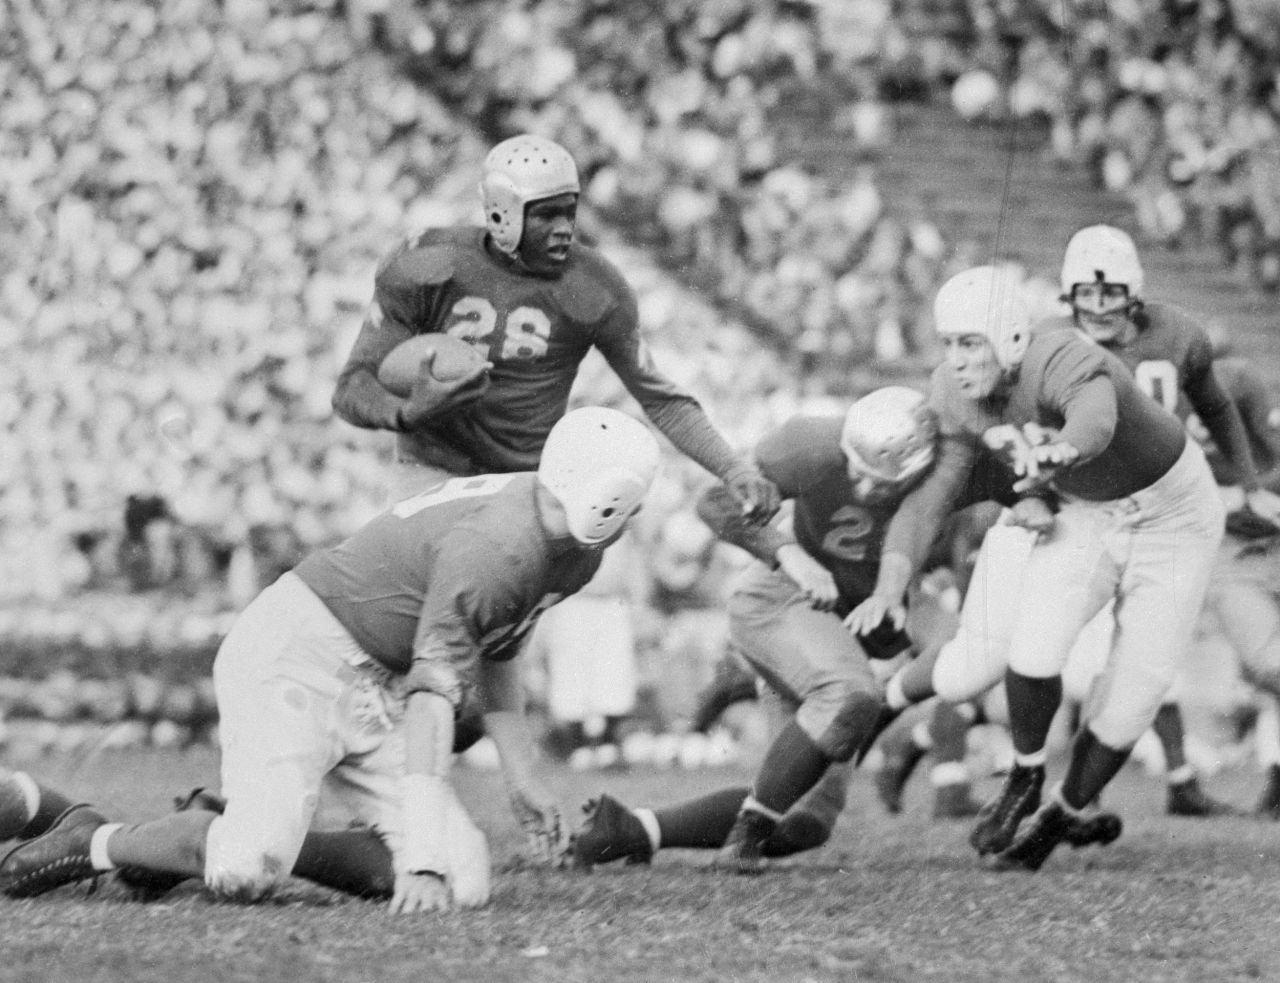 Robinson was a formidable athlete in college, lettering in four sports at UCLA. He led the nation in rushing as a football player. After college, Robinson was drafted by the US Army and spent a couple of years in the military.